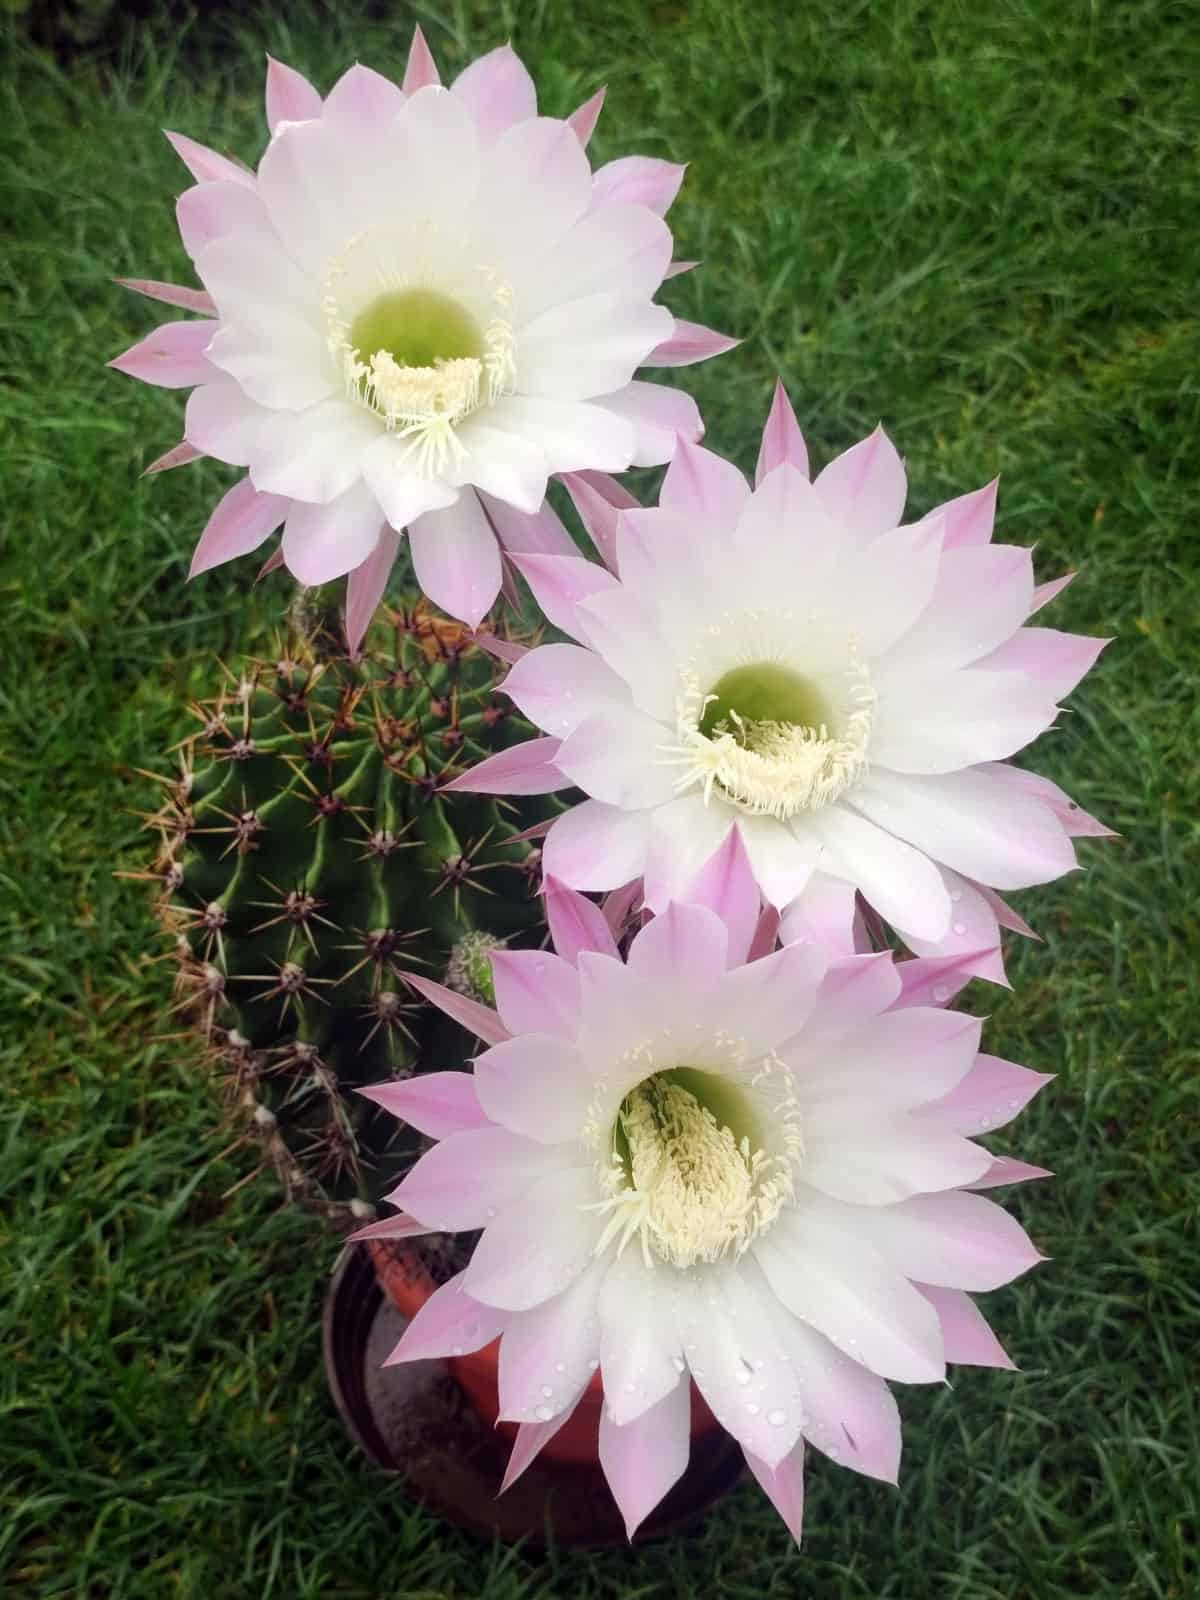 Vibrant light pink flowers of an Easter lily cactus